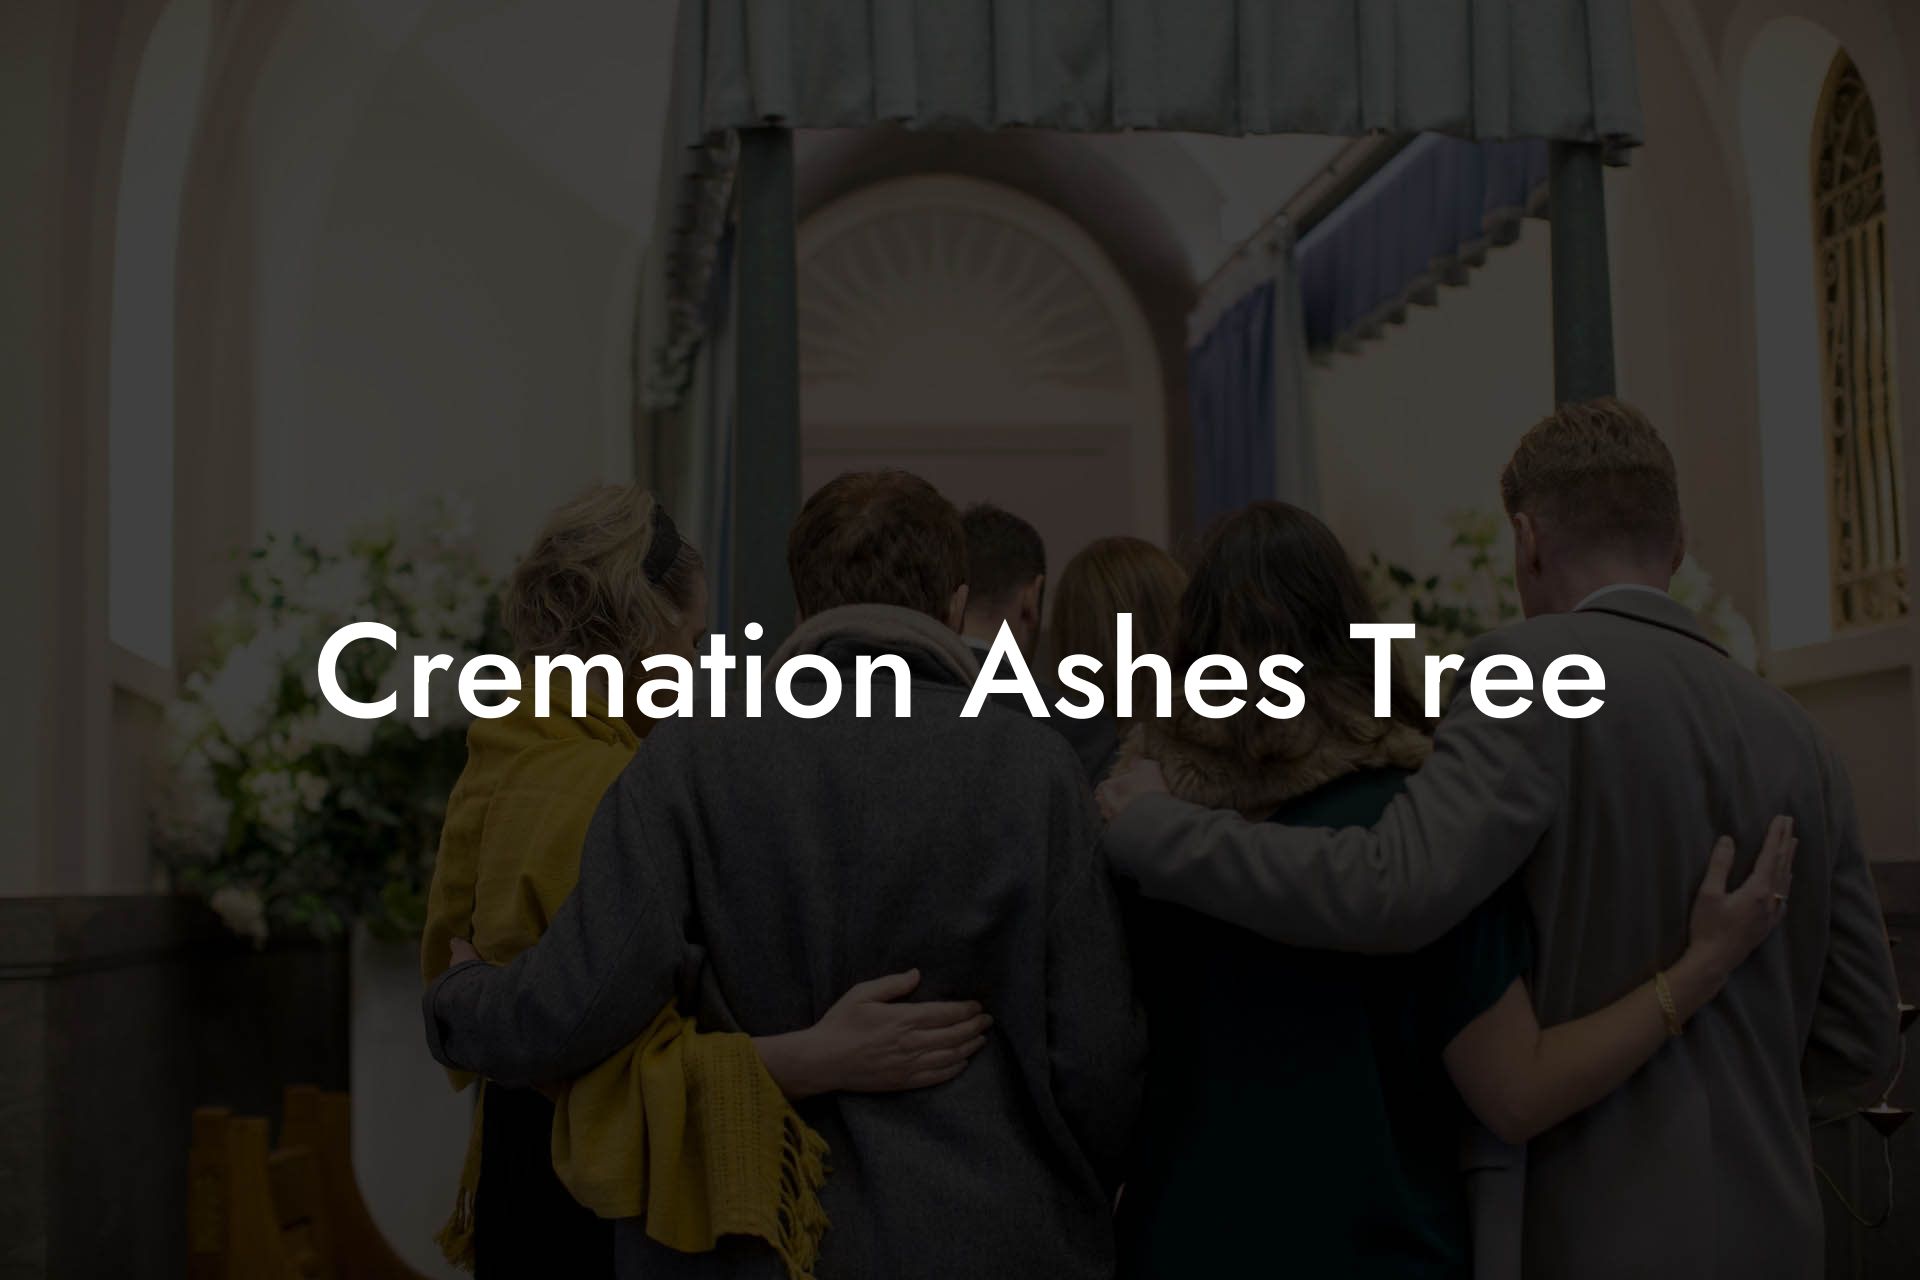 Cremation Ashes Tree